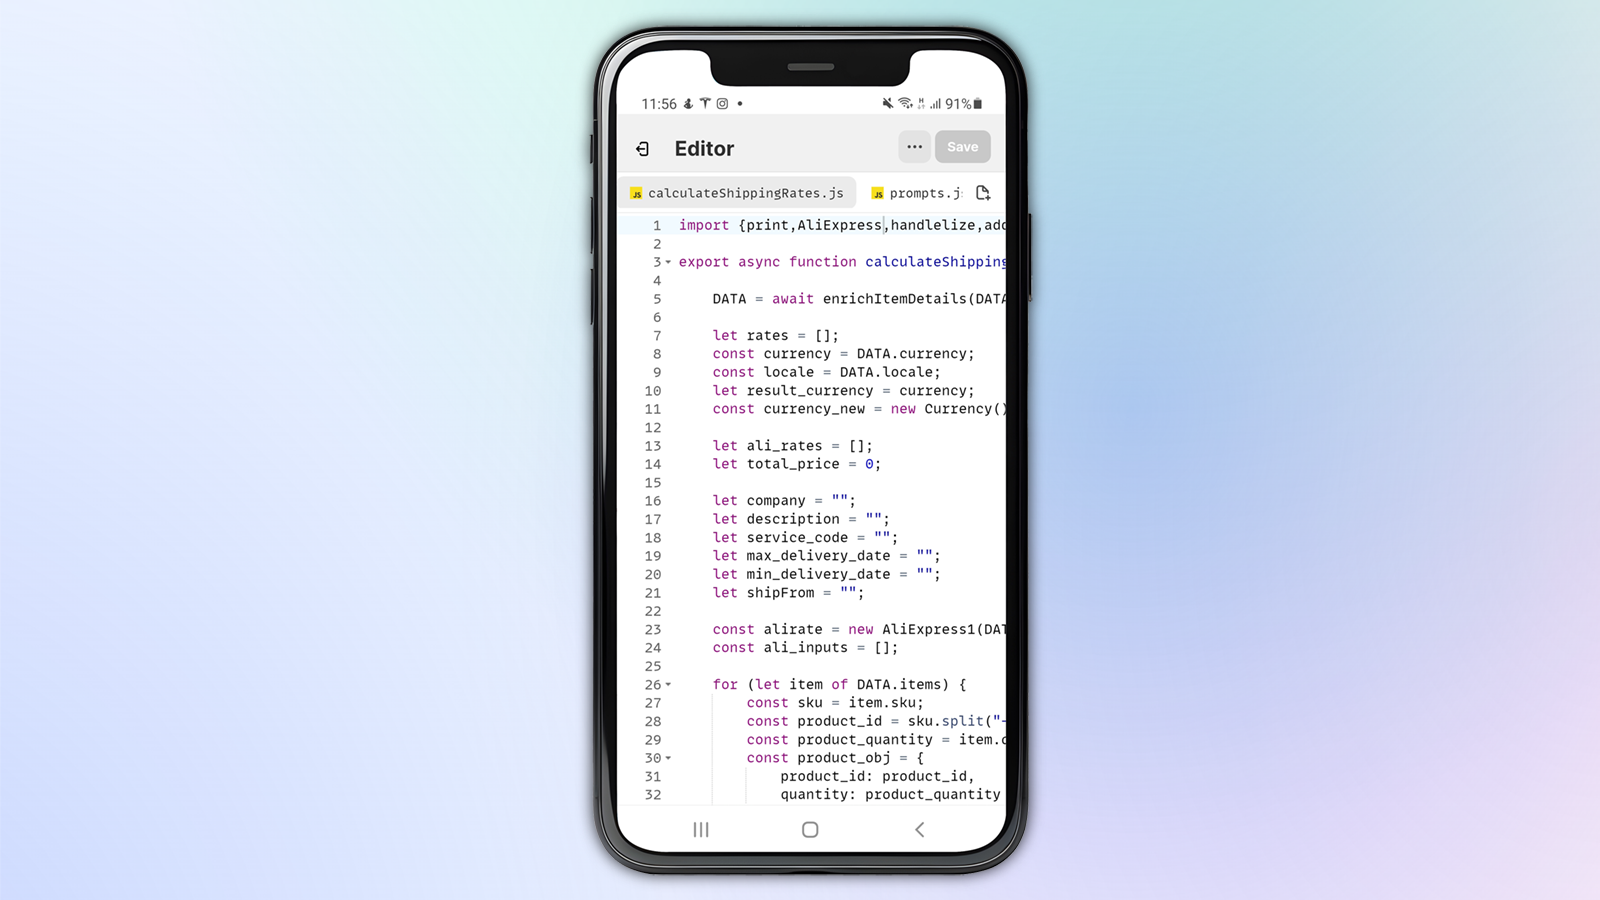 JsRates app editor page in mobile